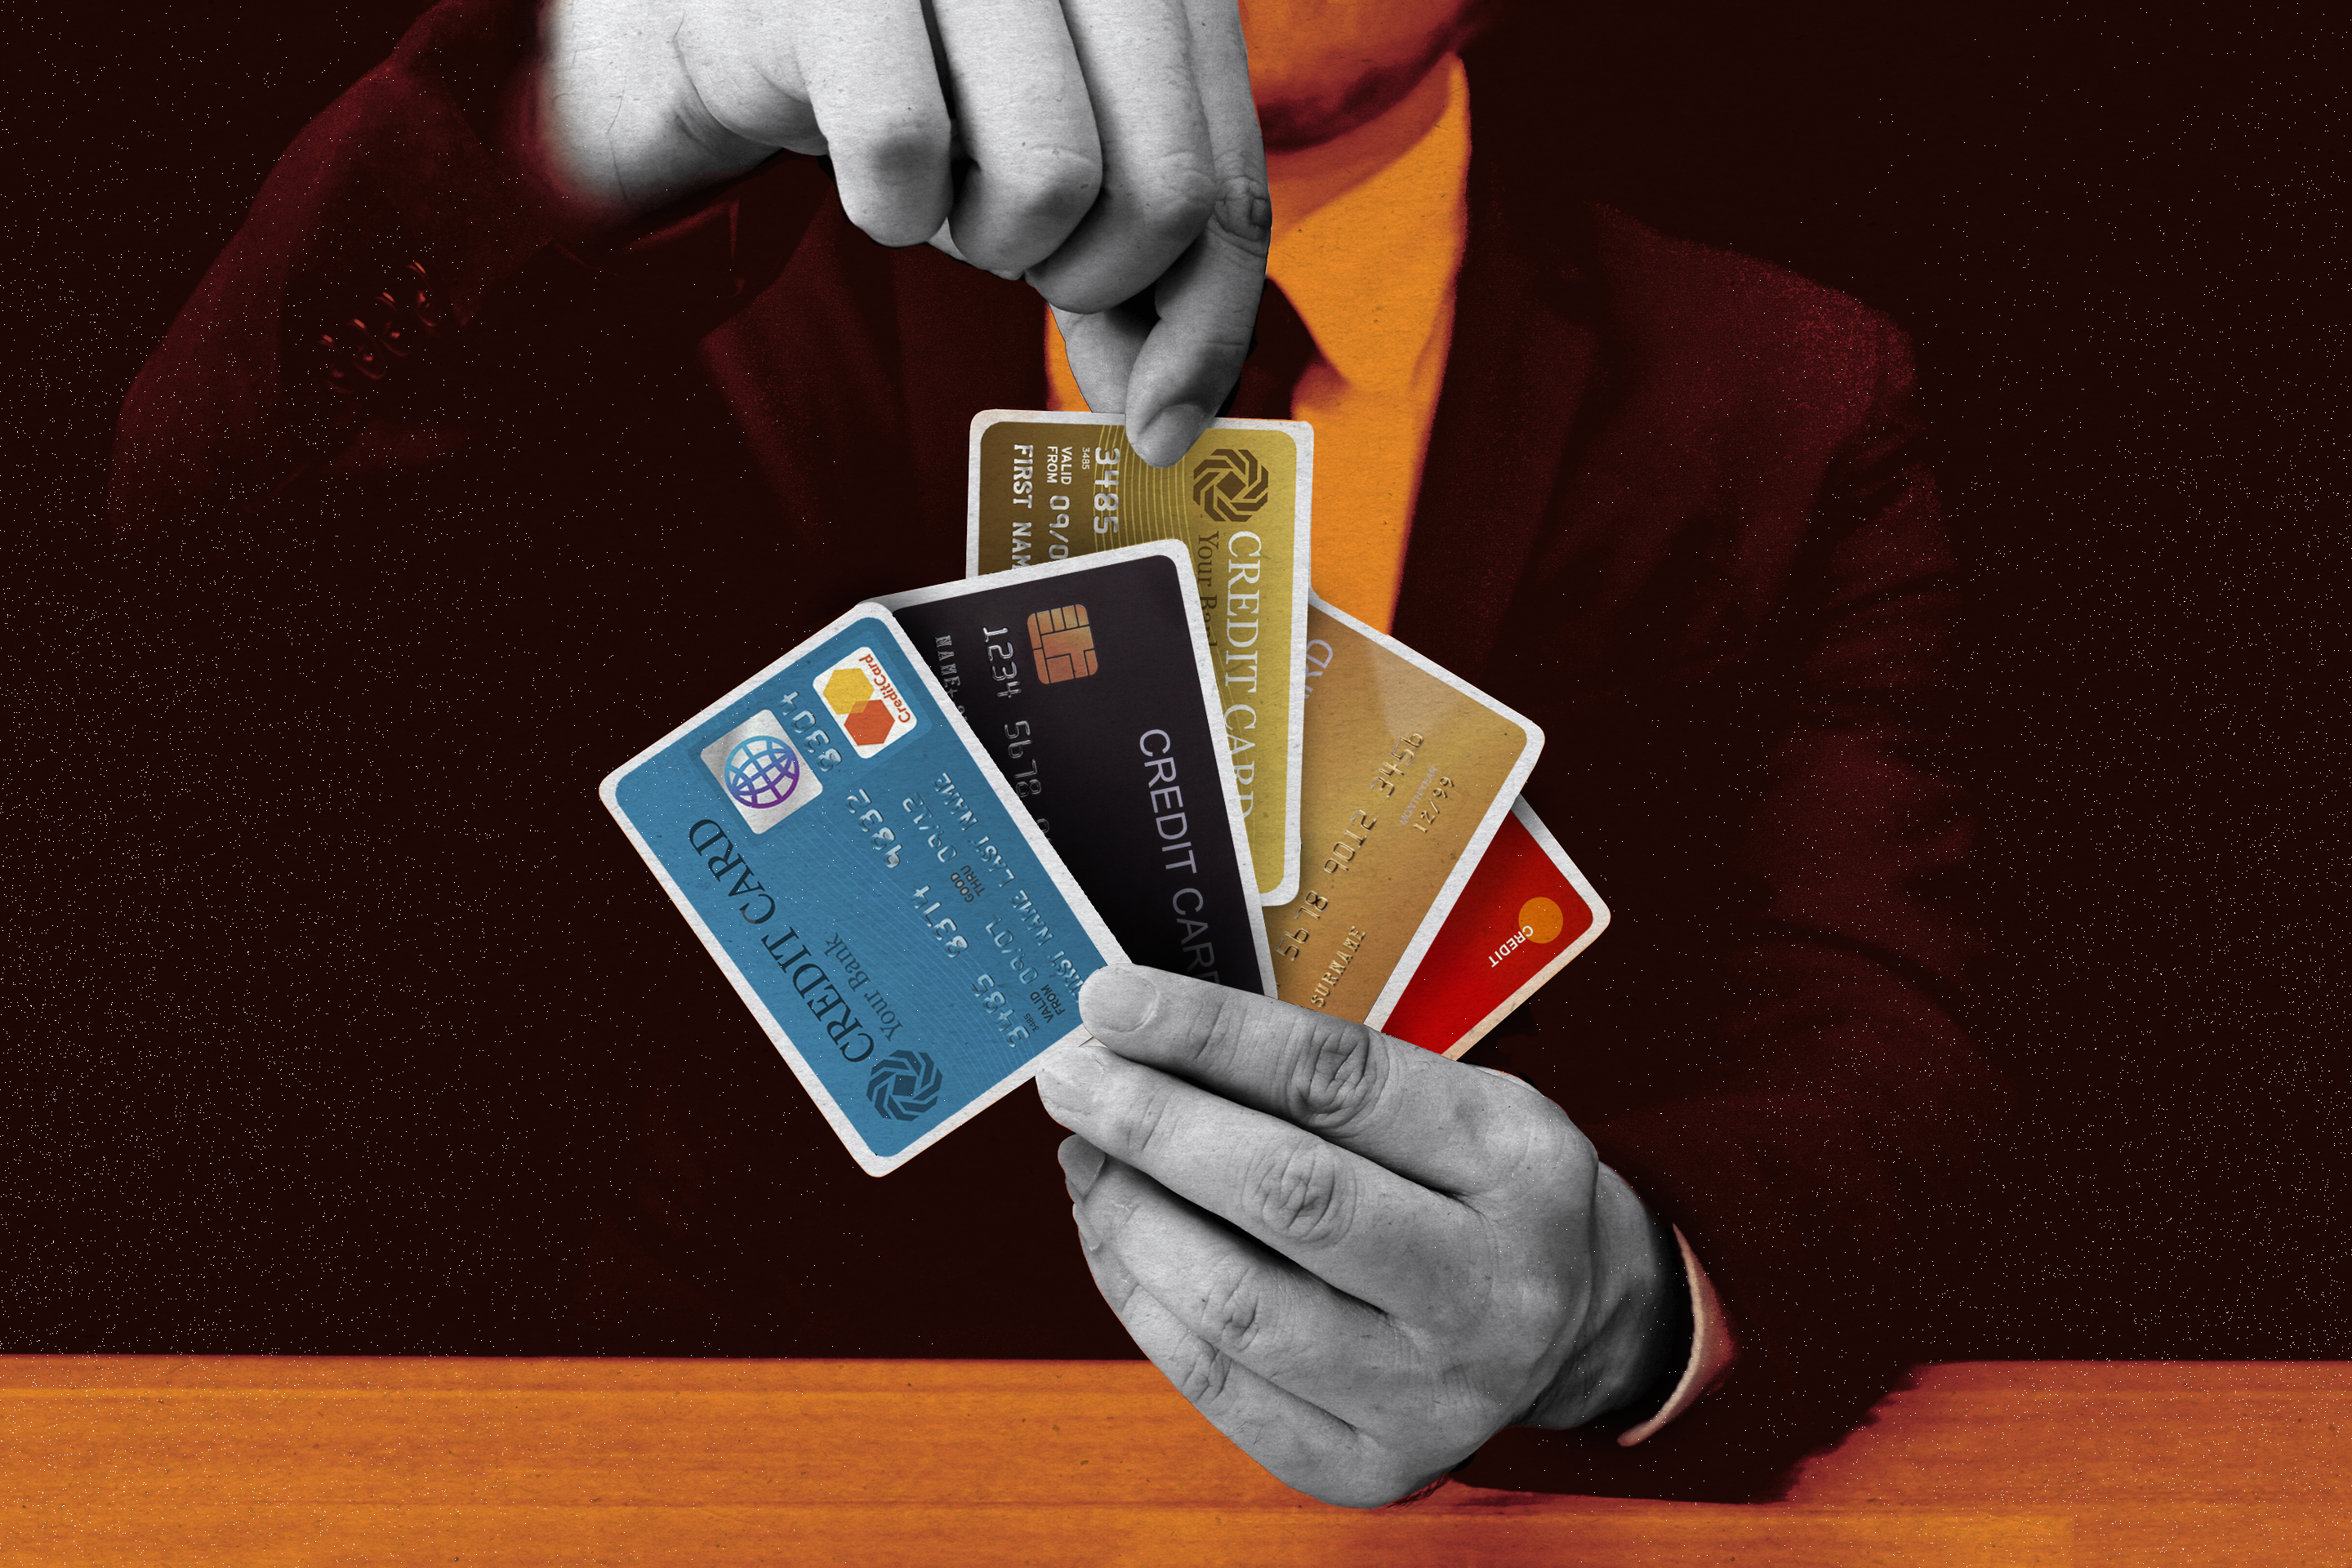 Americans Are Getting Tons of New Credit Cards to Cope With Inflation